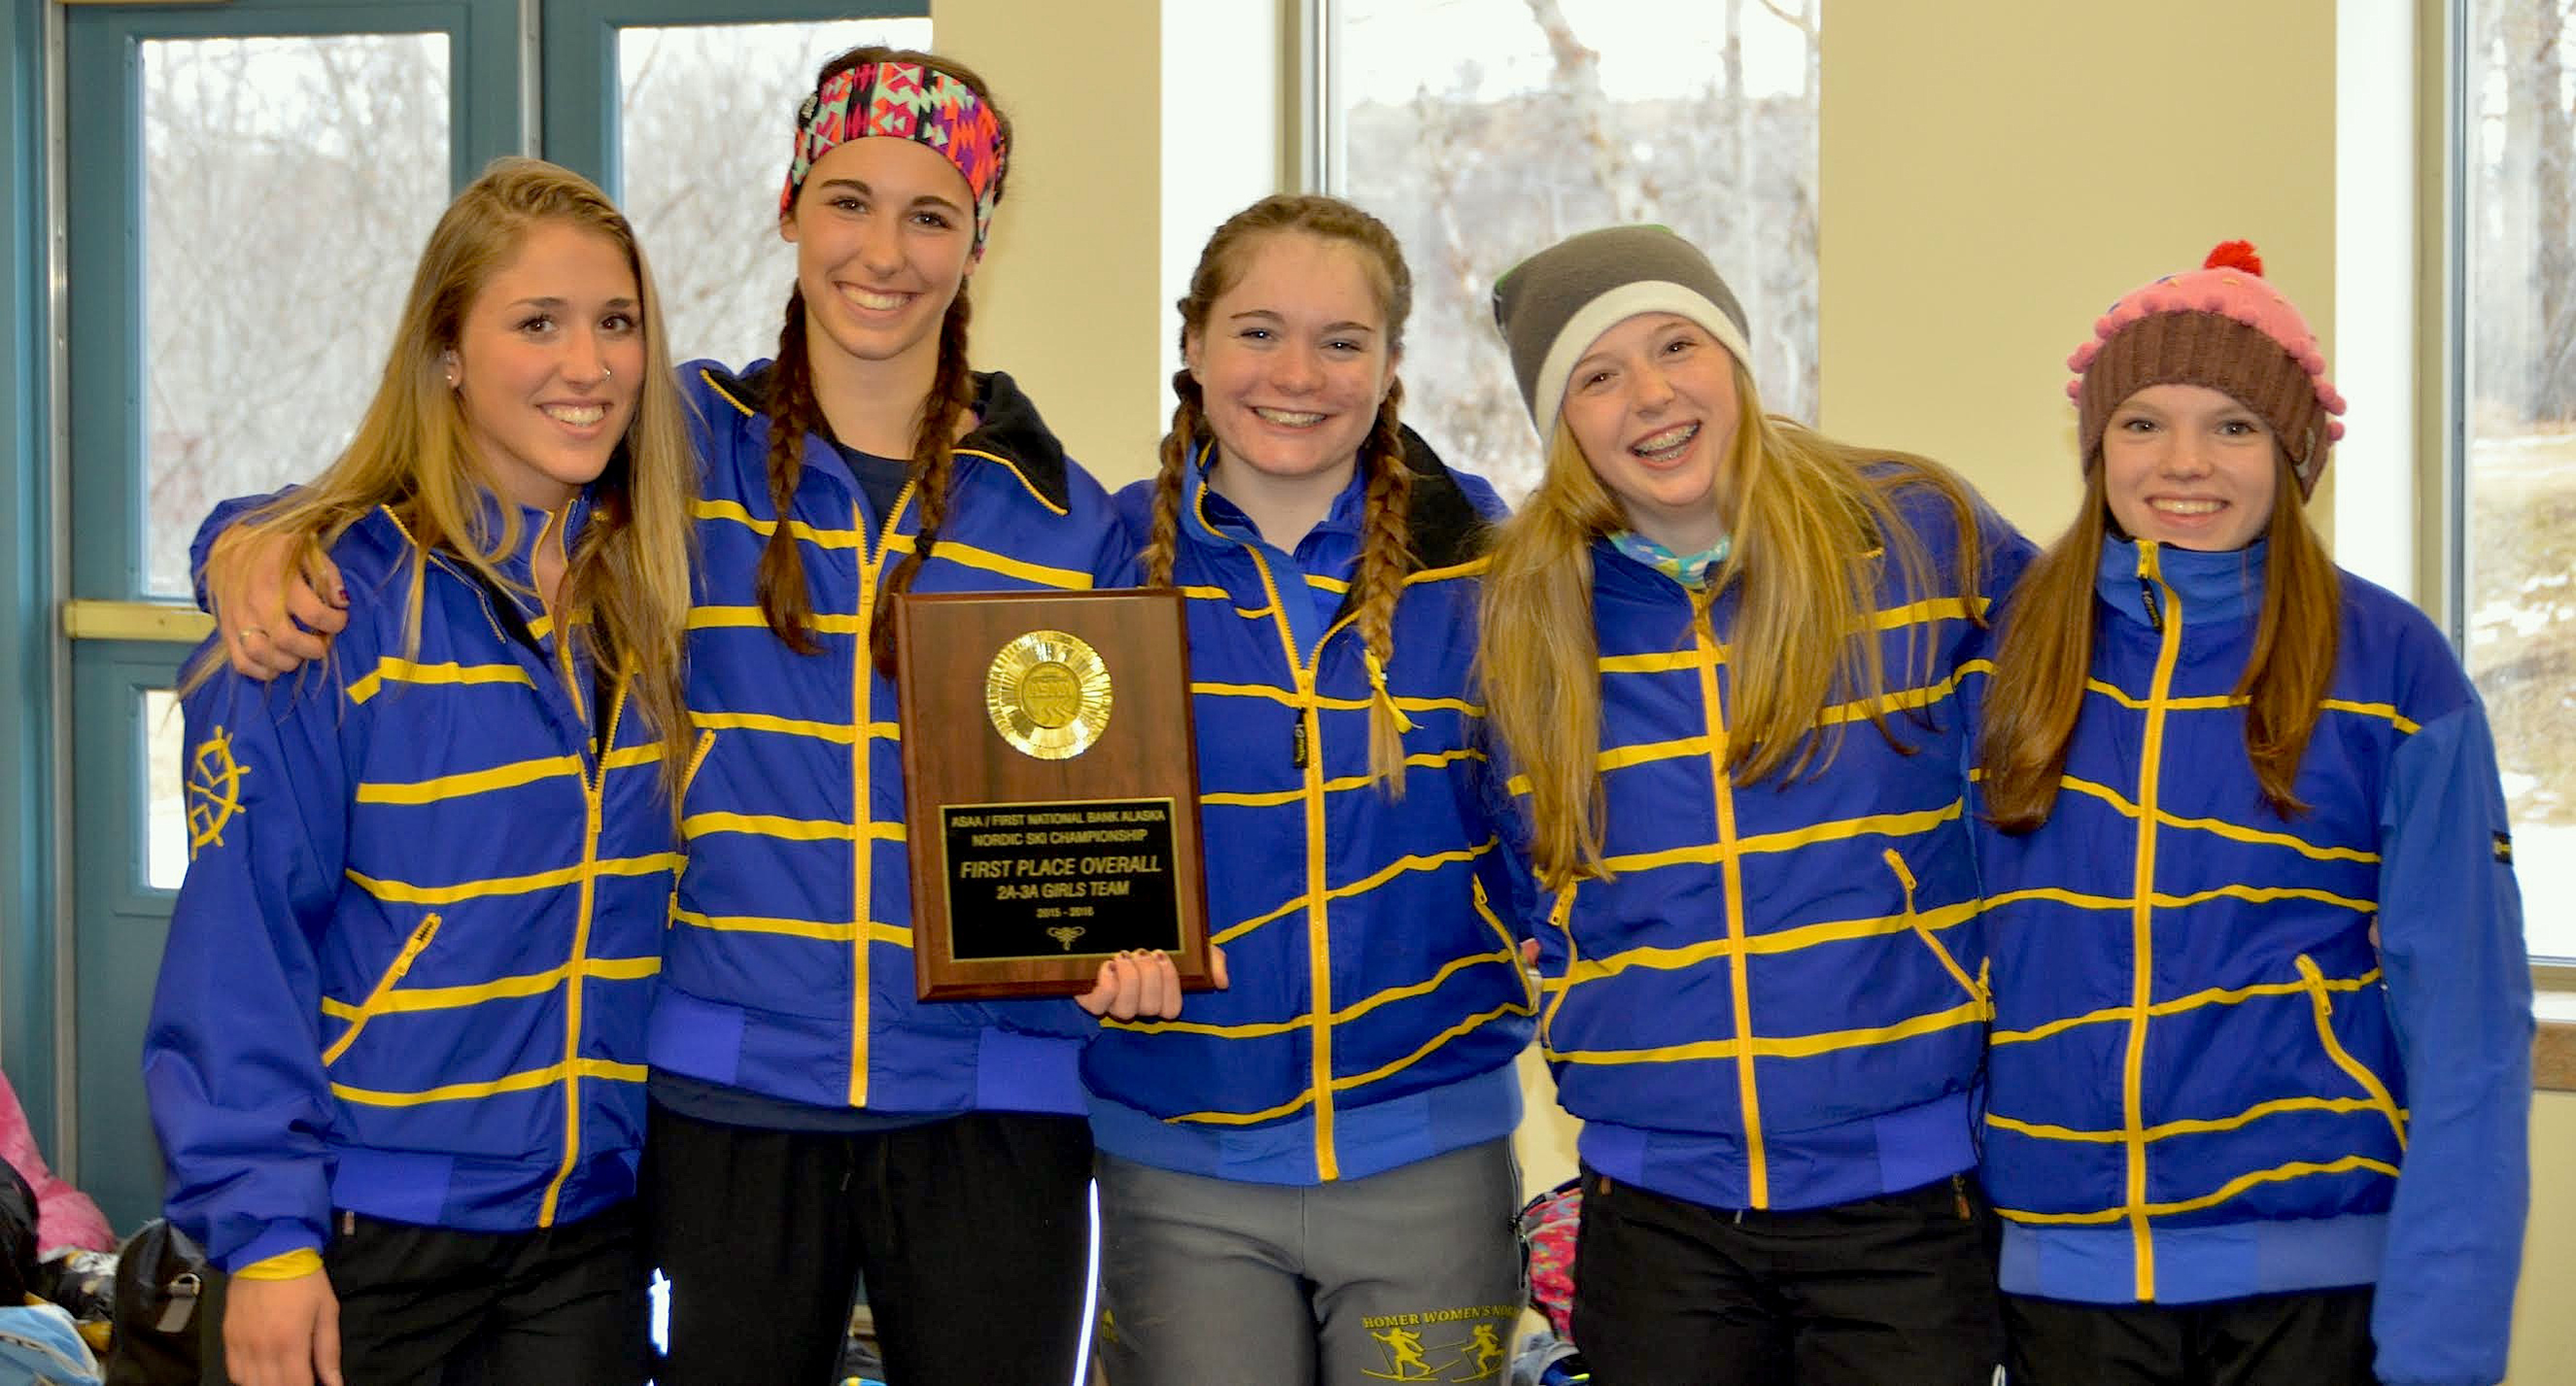 Rachel Ellert, Mariah Vantrease, Katia Holmes, Mia Alexson and Katie Davis show off their first place plaque. Homer High Schools girls took first place overall for 2A-3A teams at the Nordic ski state championship the weekend of Feb. 26.-Photo provided